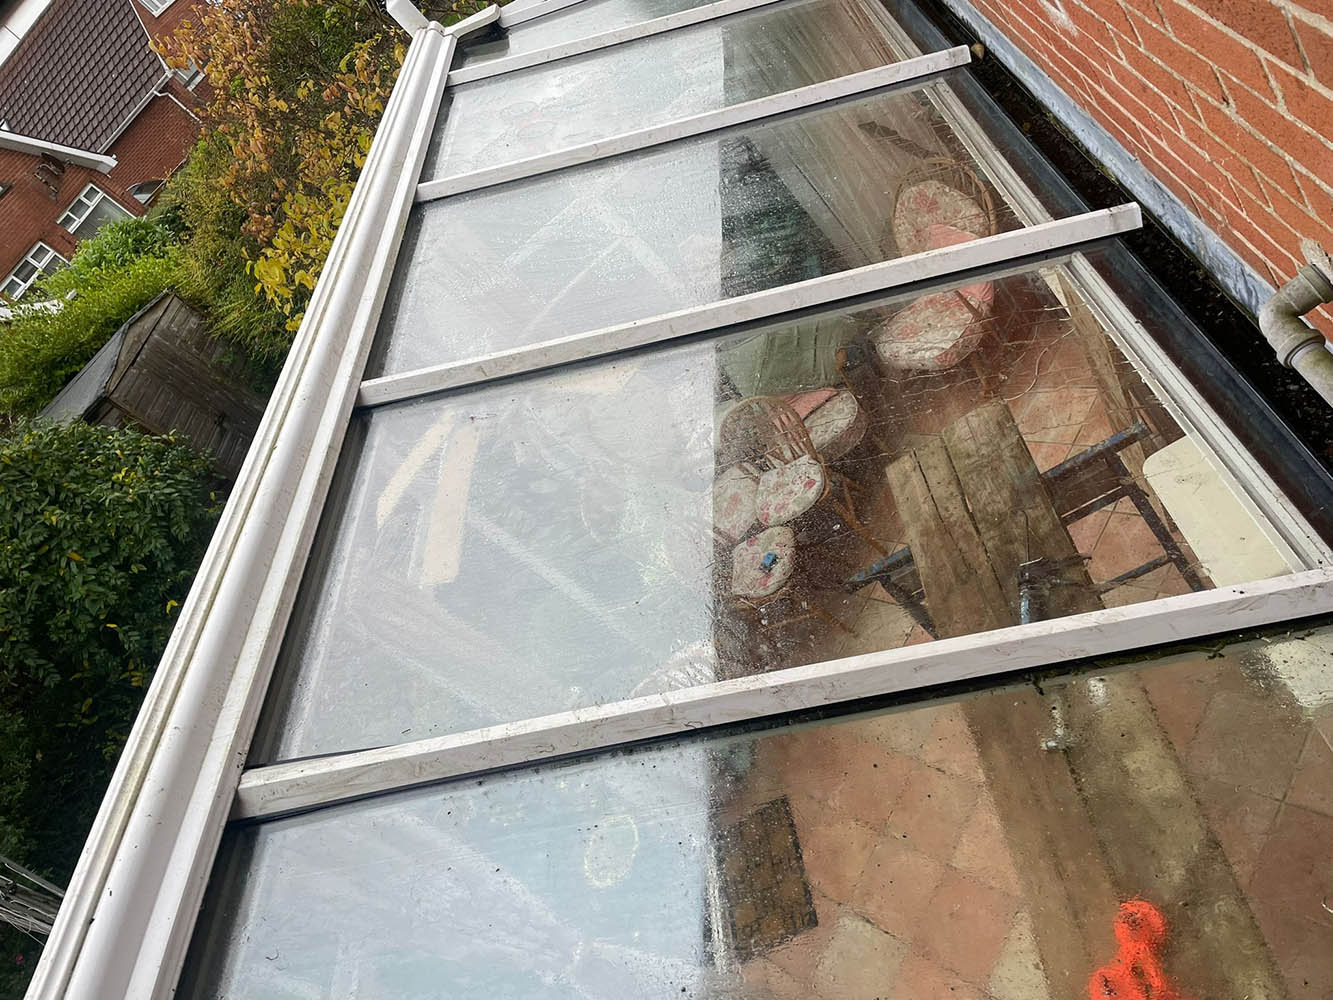 New glass installed in a sunroom